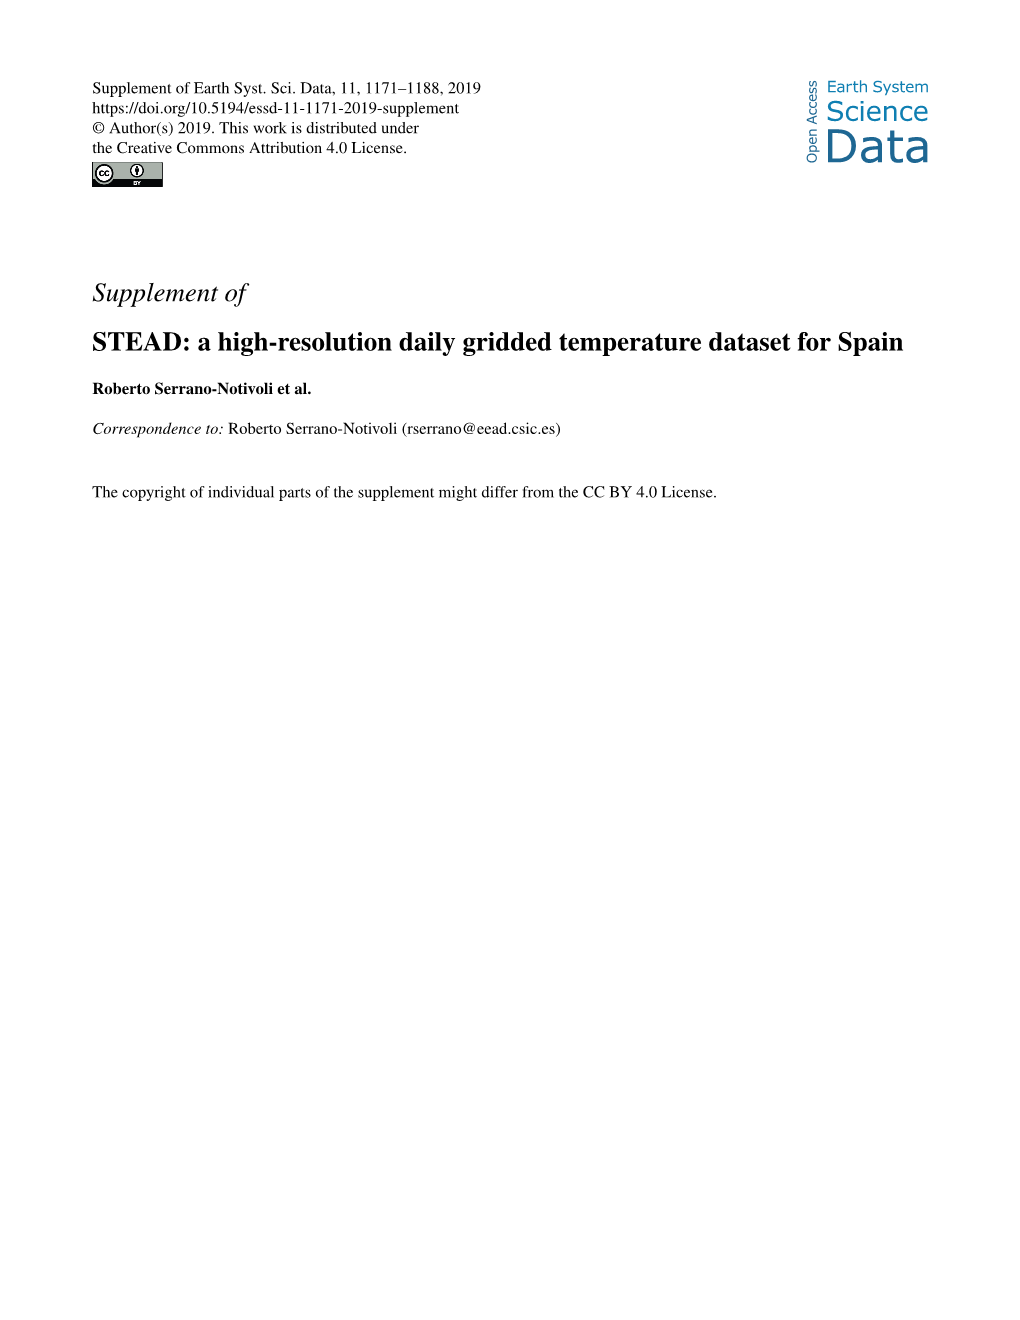 Supplement of STEAD: a High-Resolution Daily Gridded Temperature Dataset for Spain